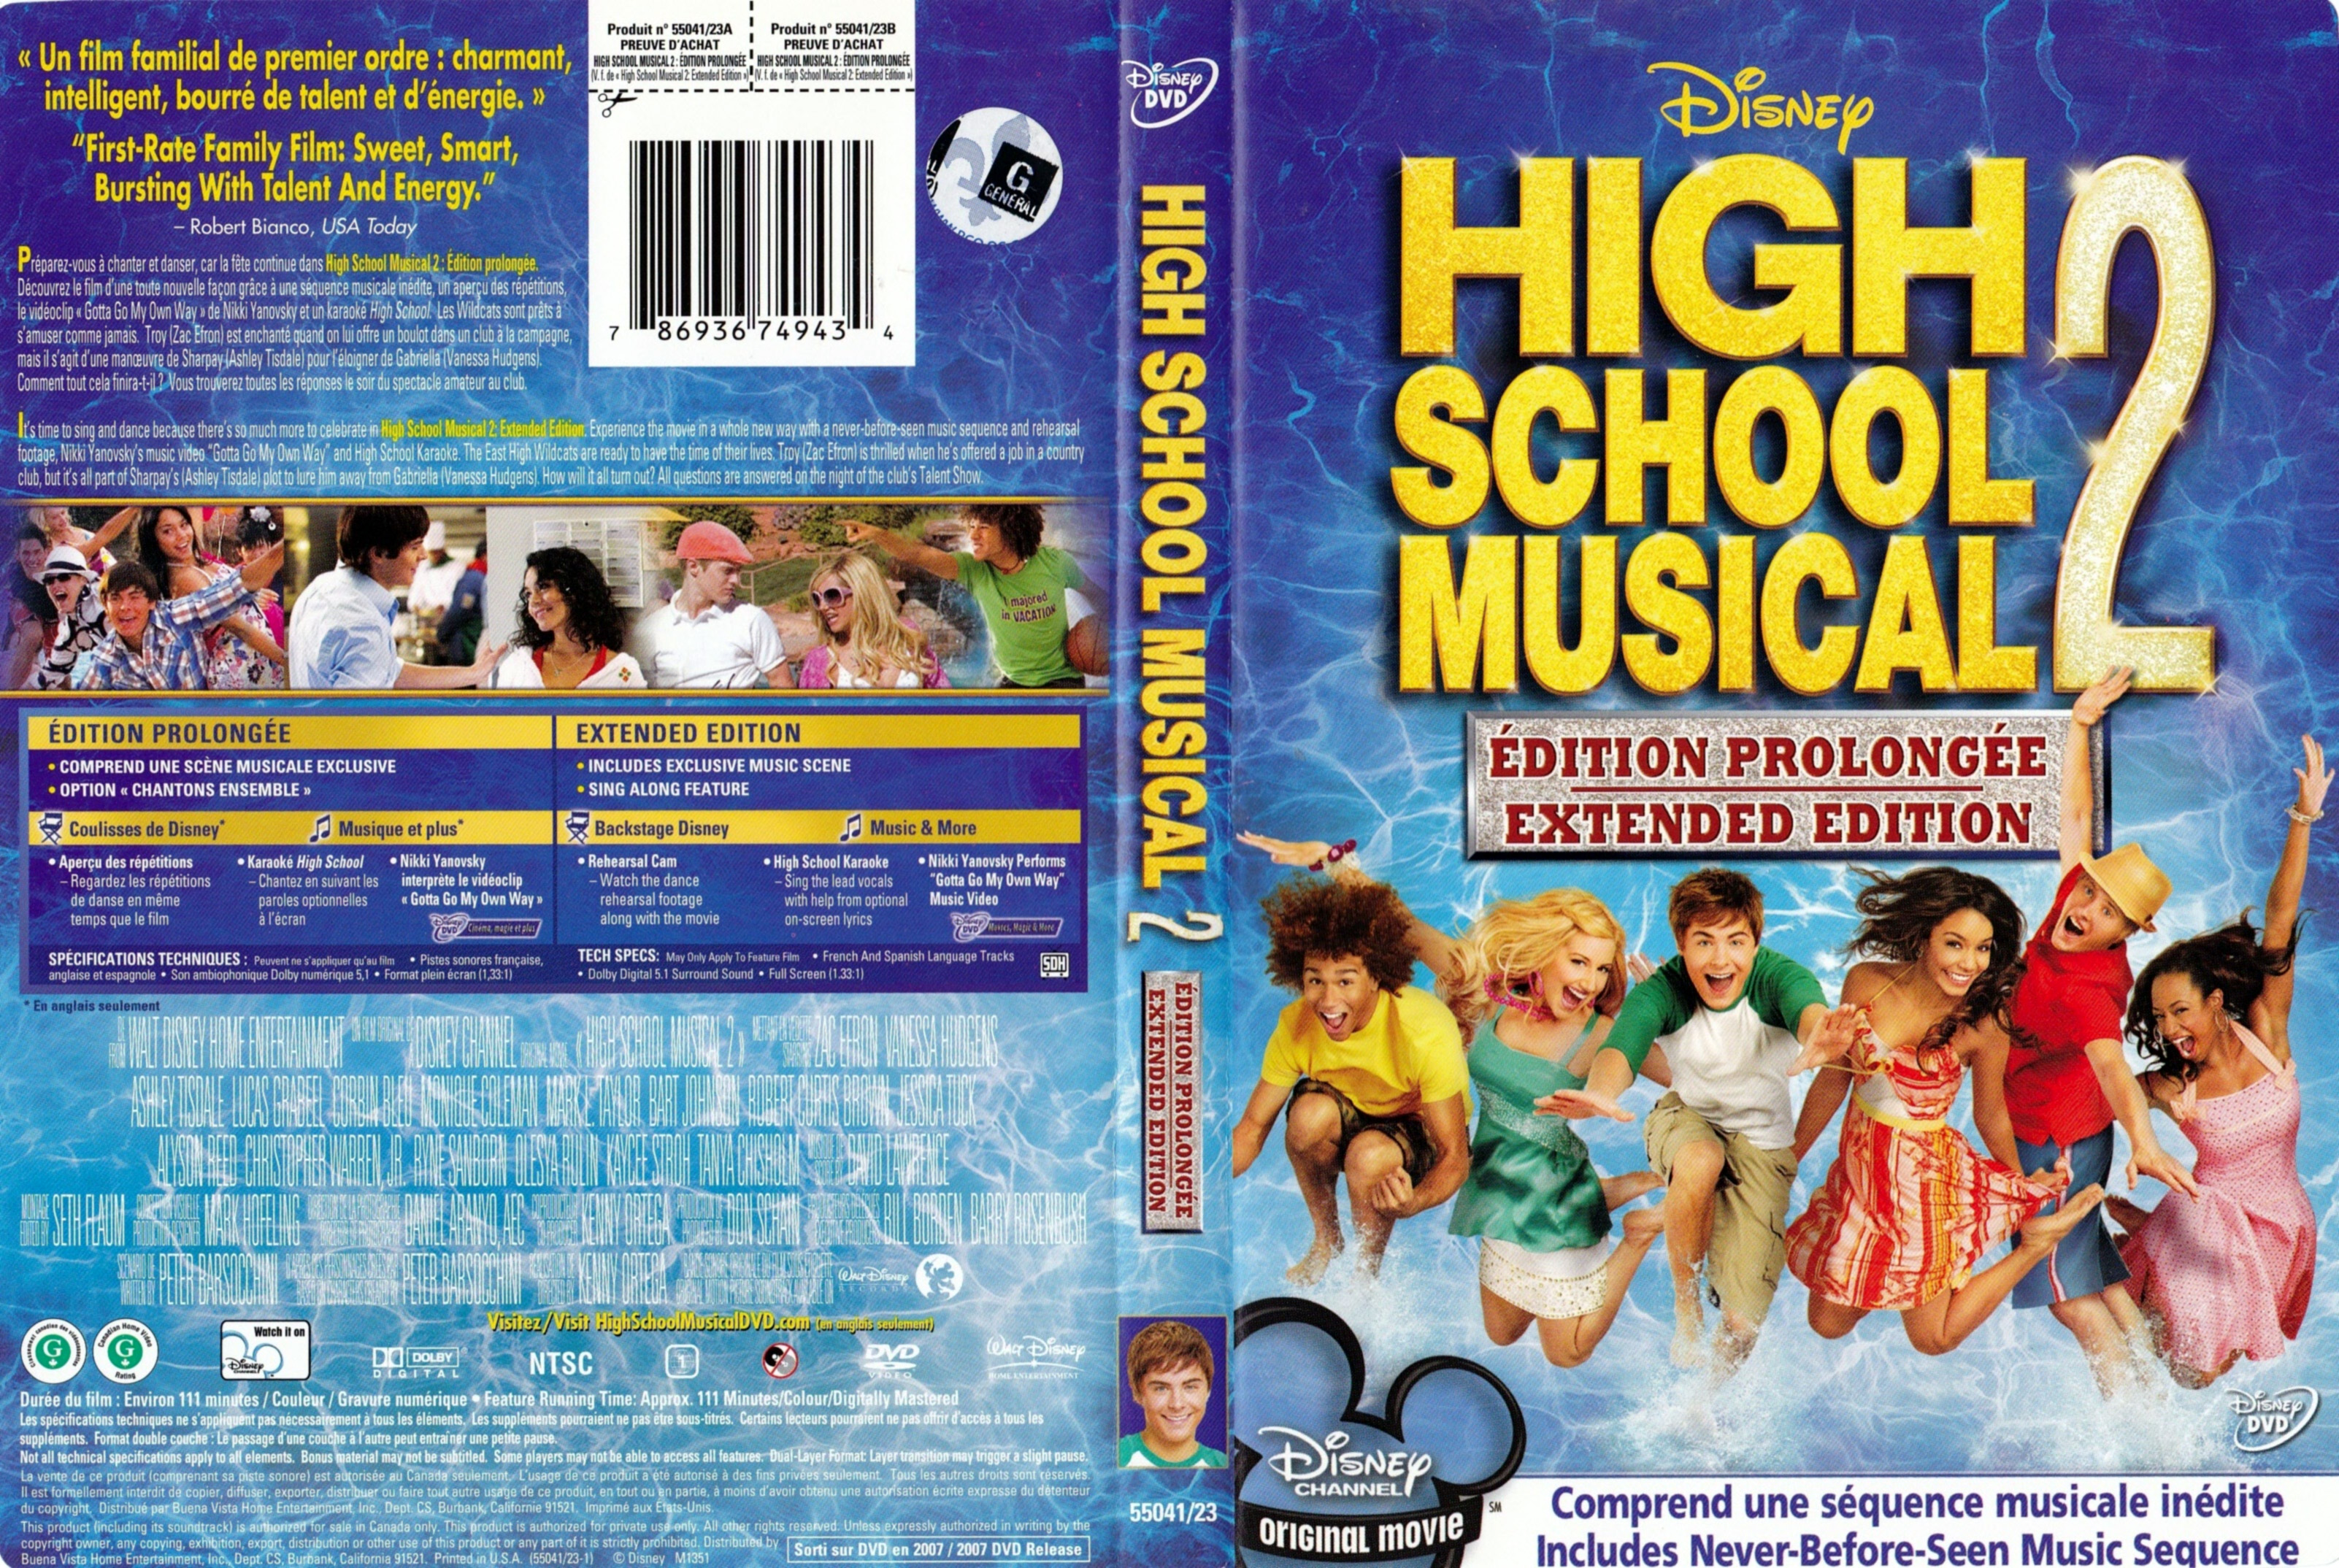 Jaquette DVD High school musical 2 (Canadienne)